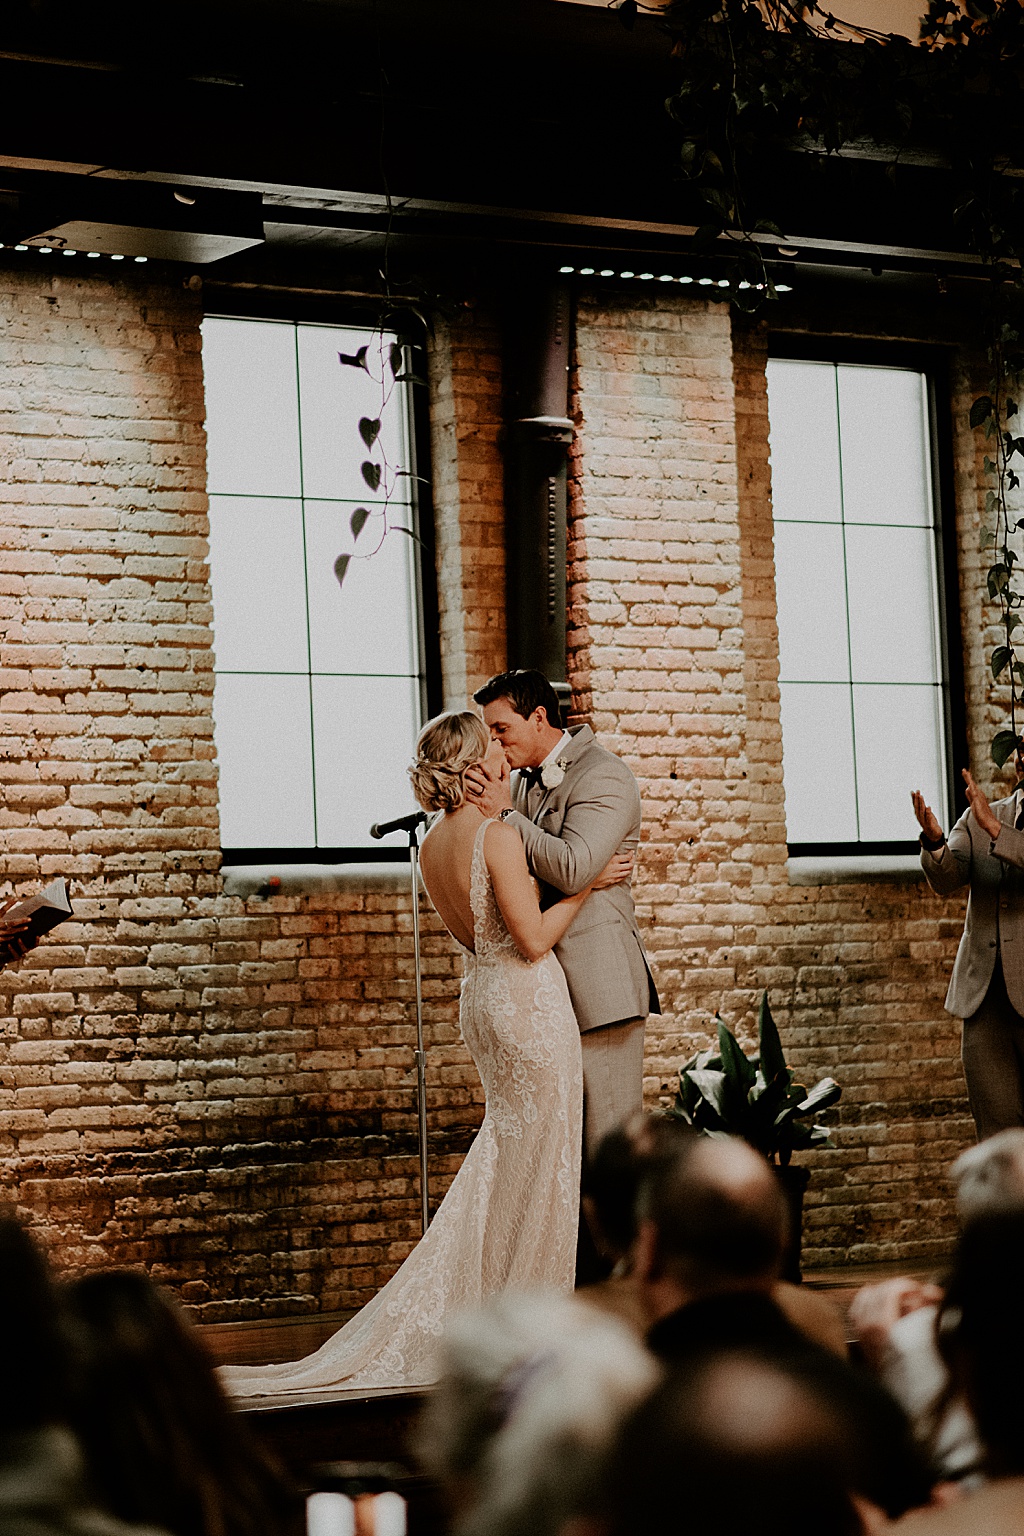 bride and groom kissing at wedding ceremony by large windows in brick building